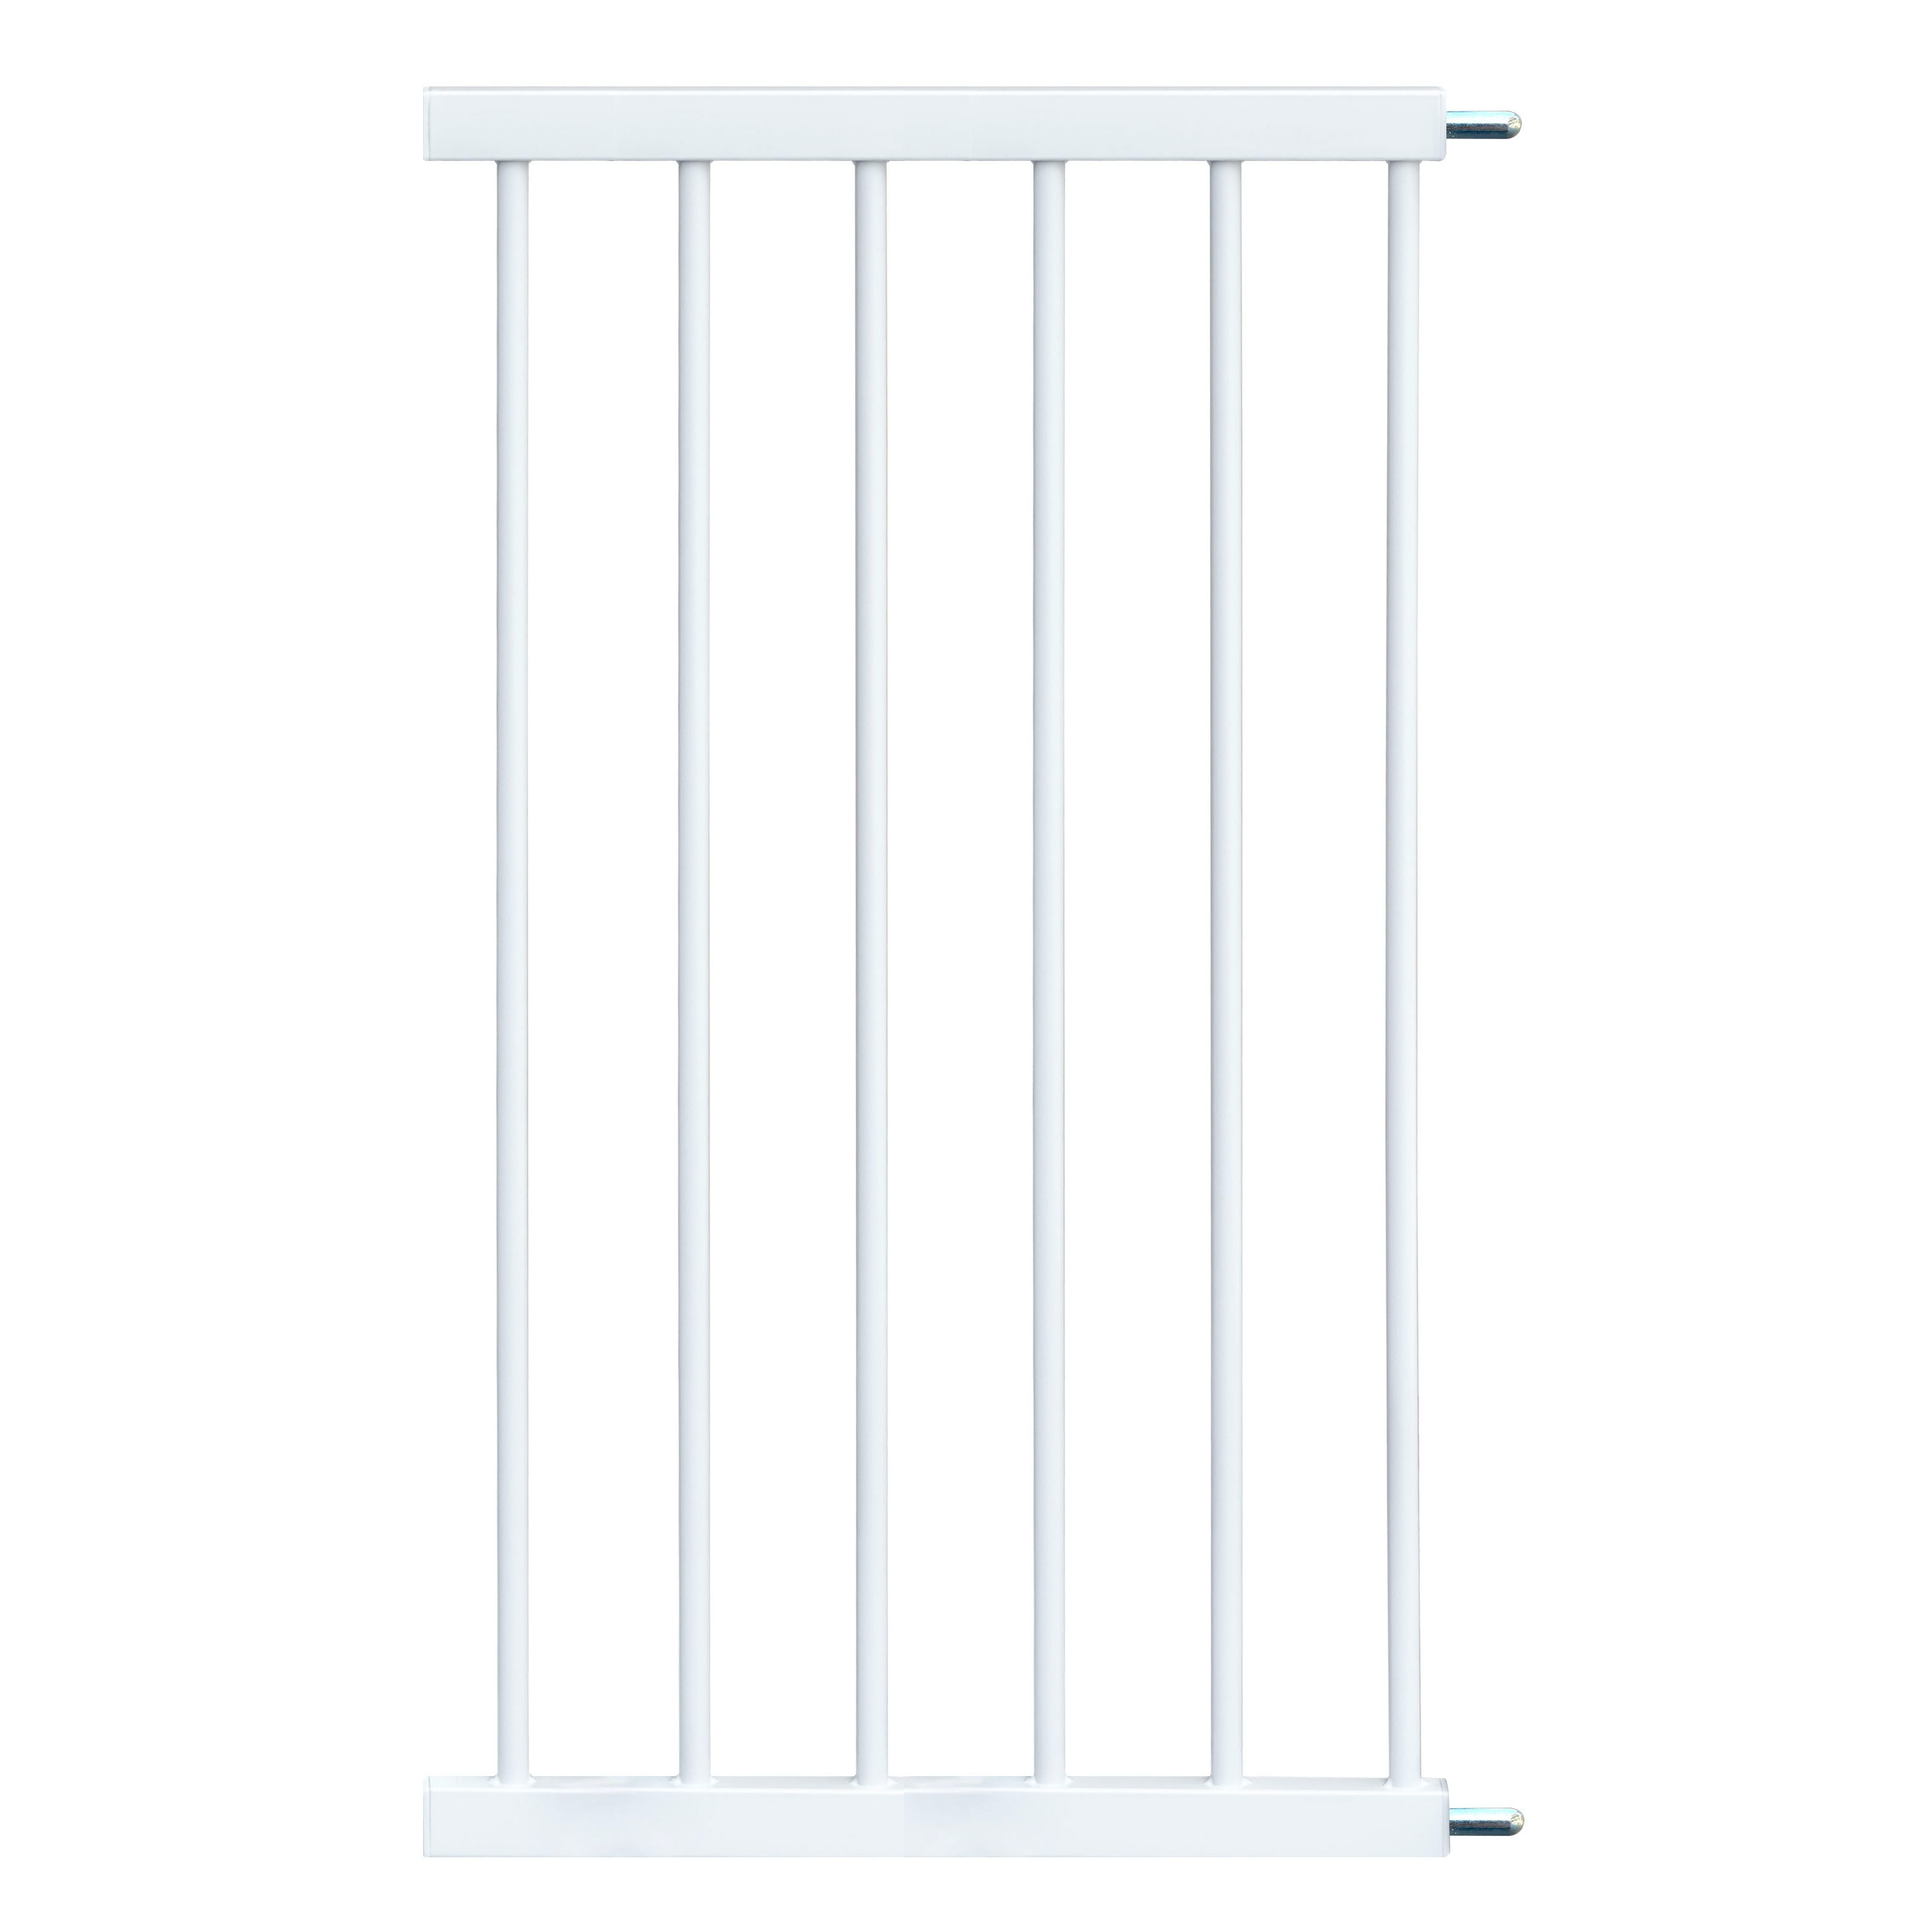 Mothercare | Fisher-Price Barricade Security Gate for Children - Extension Part 45cms.